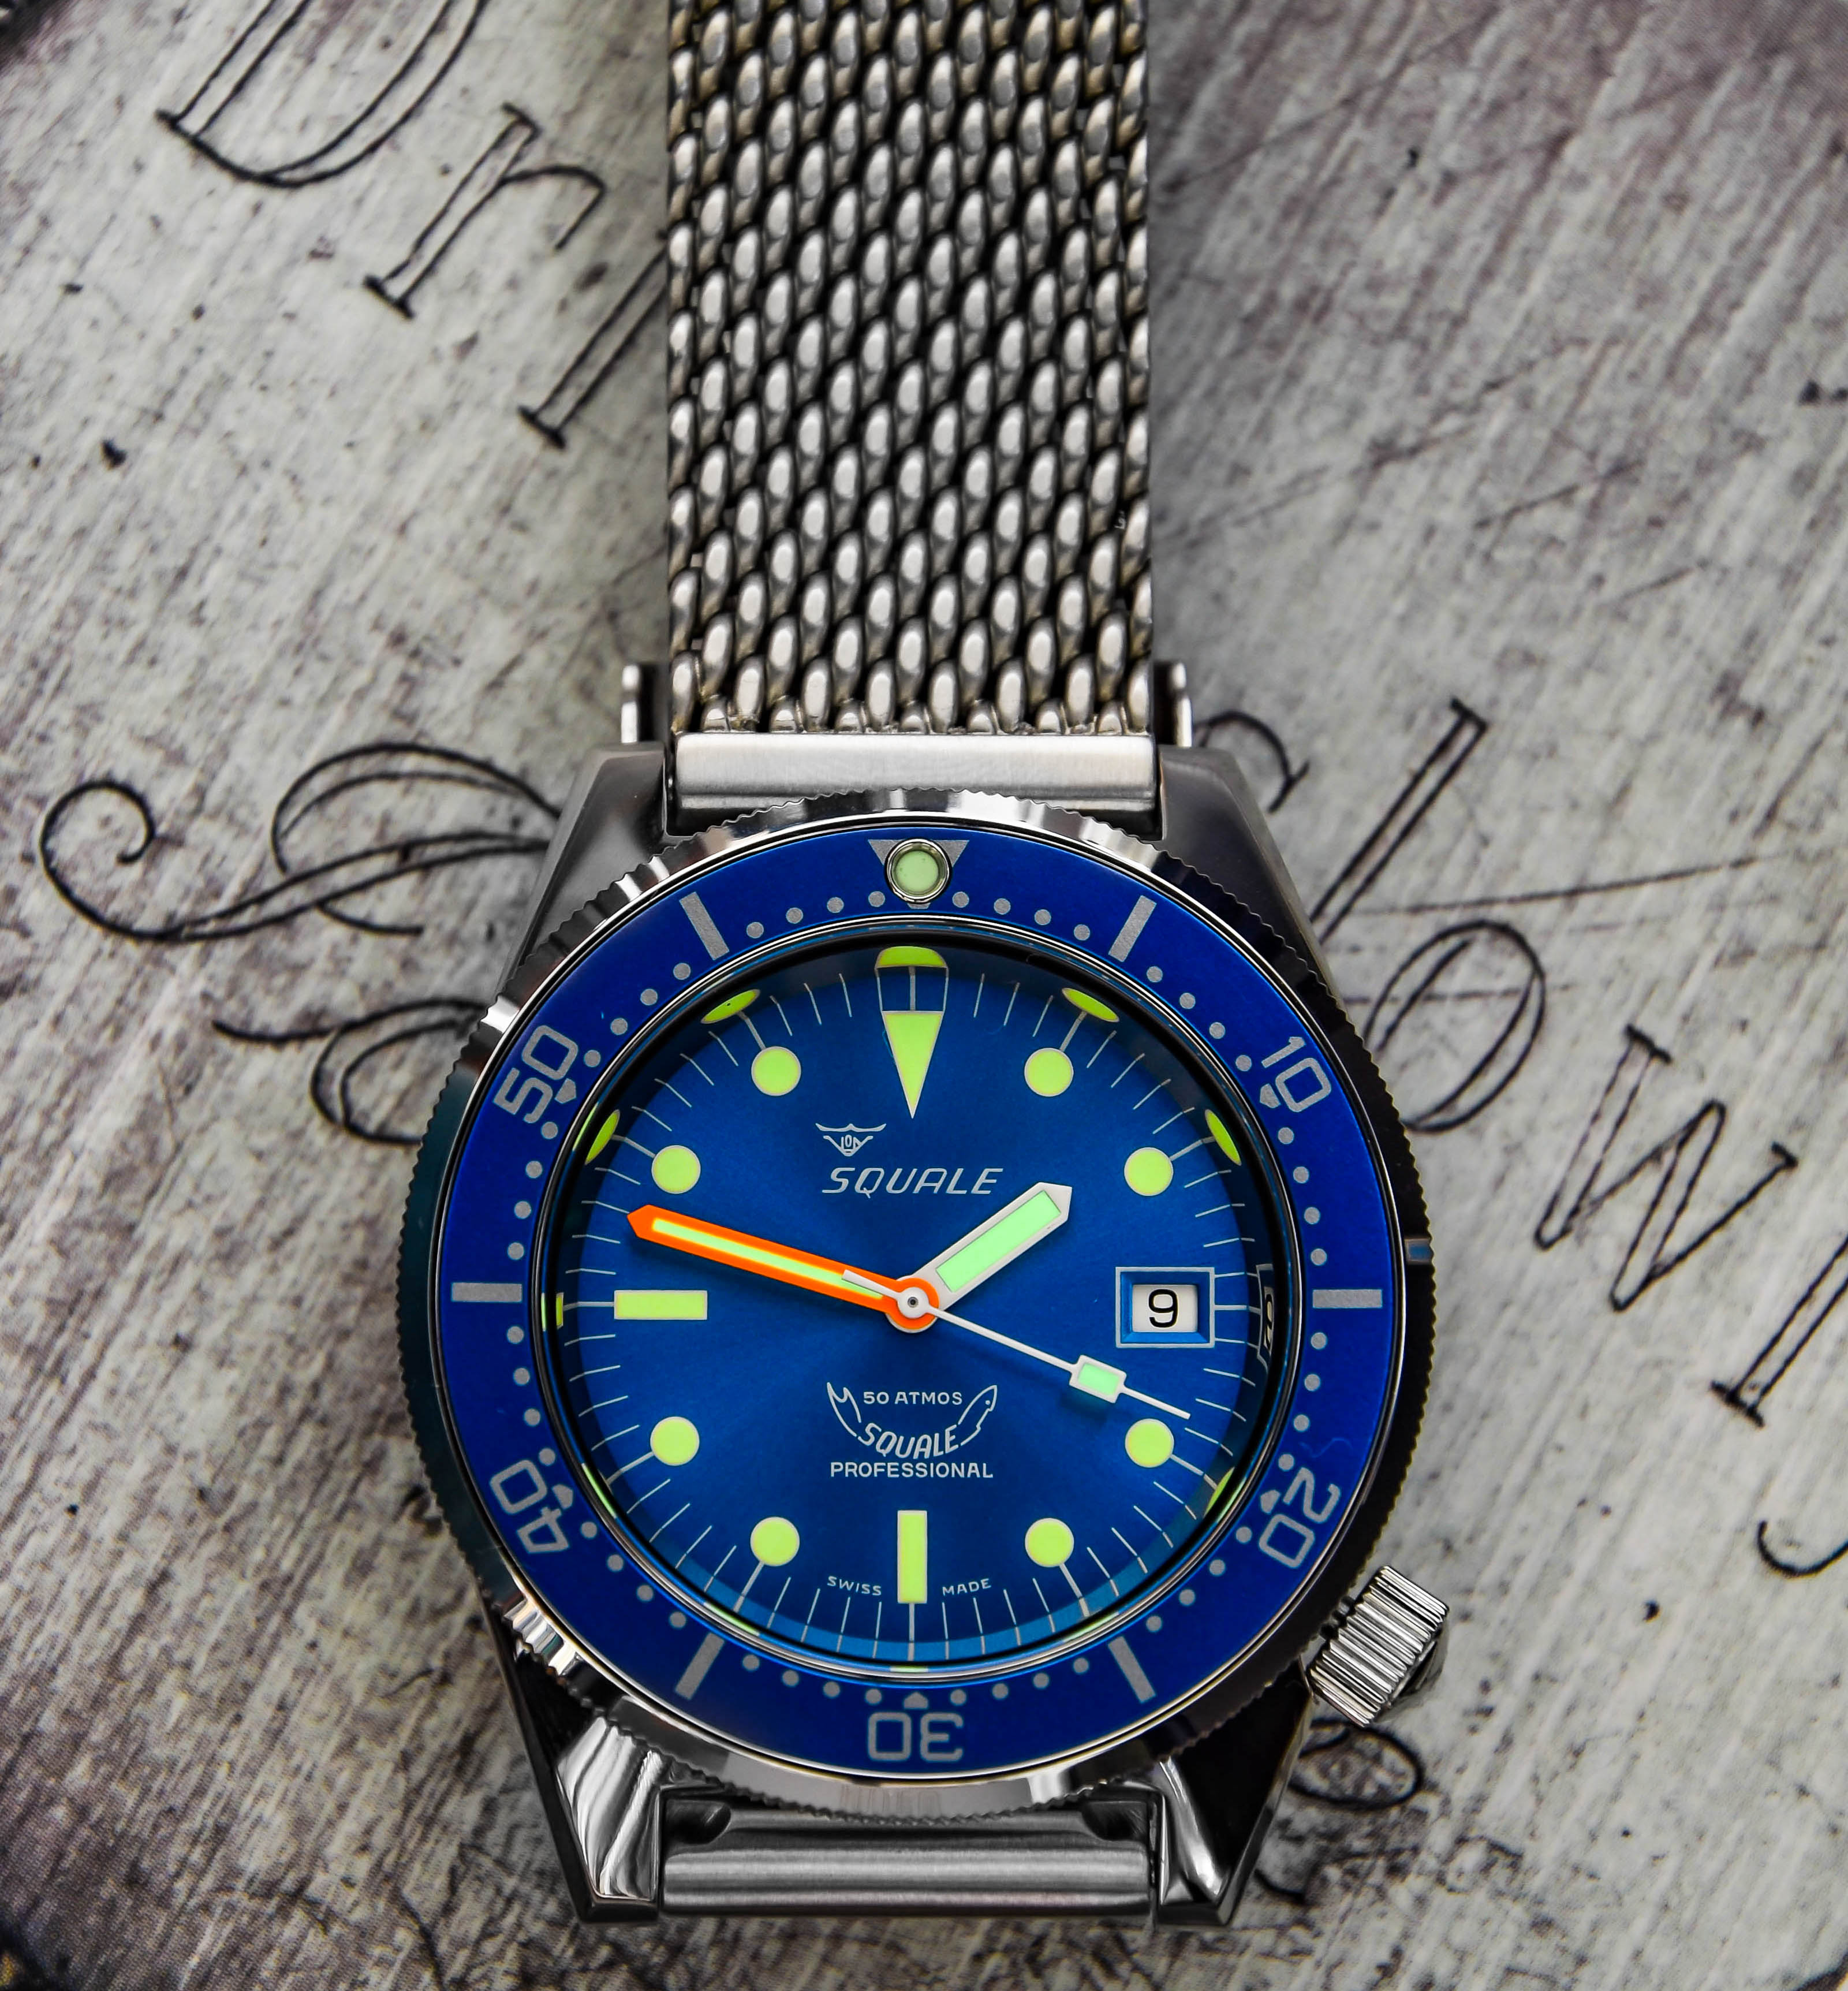 Owner Review: Squale 1521 50 Atmos